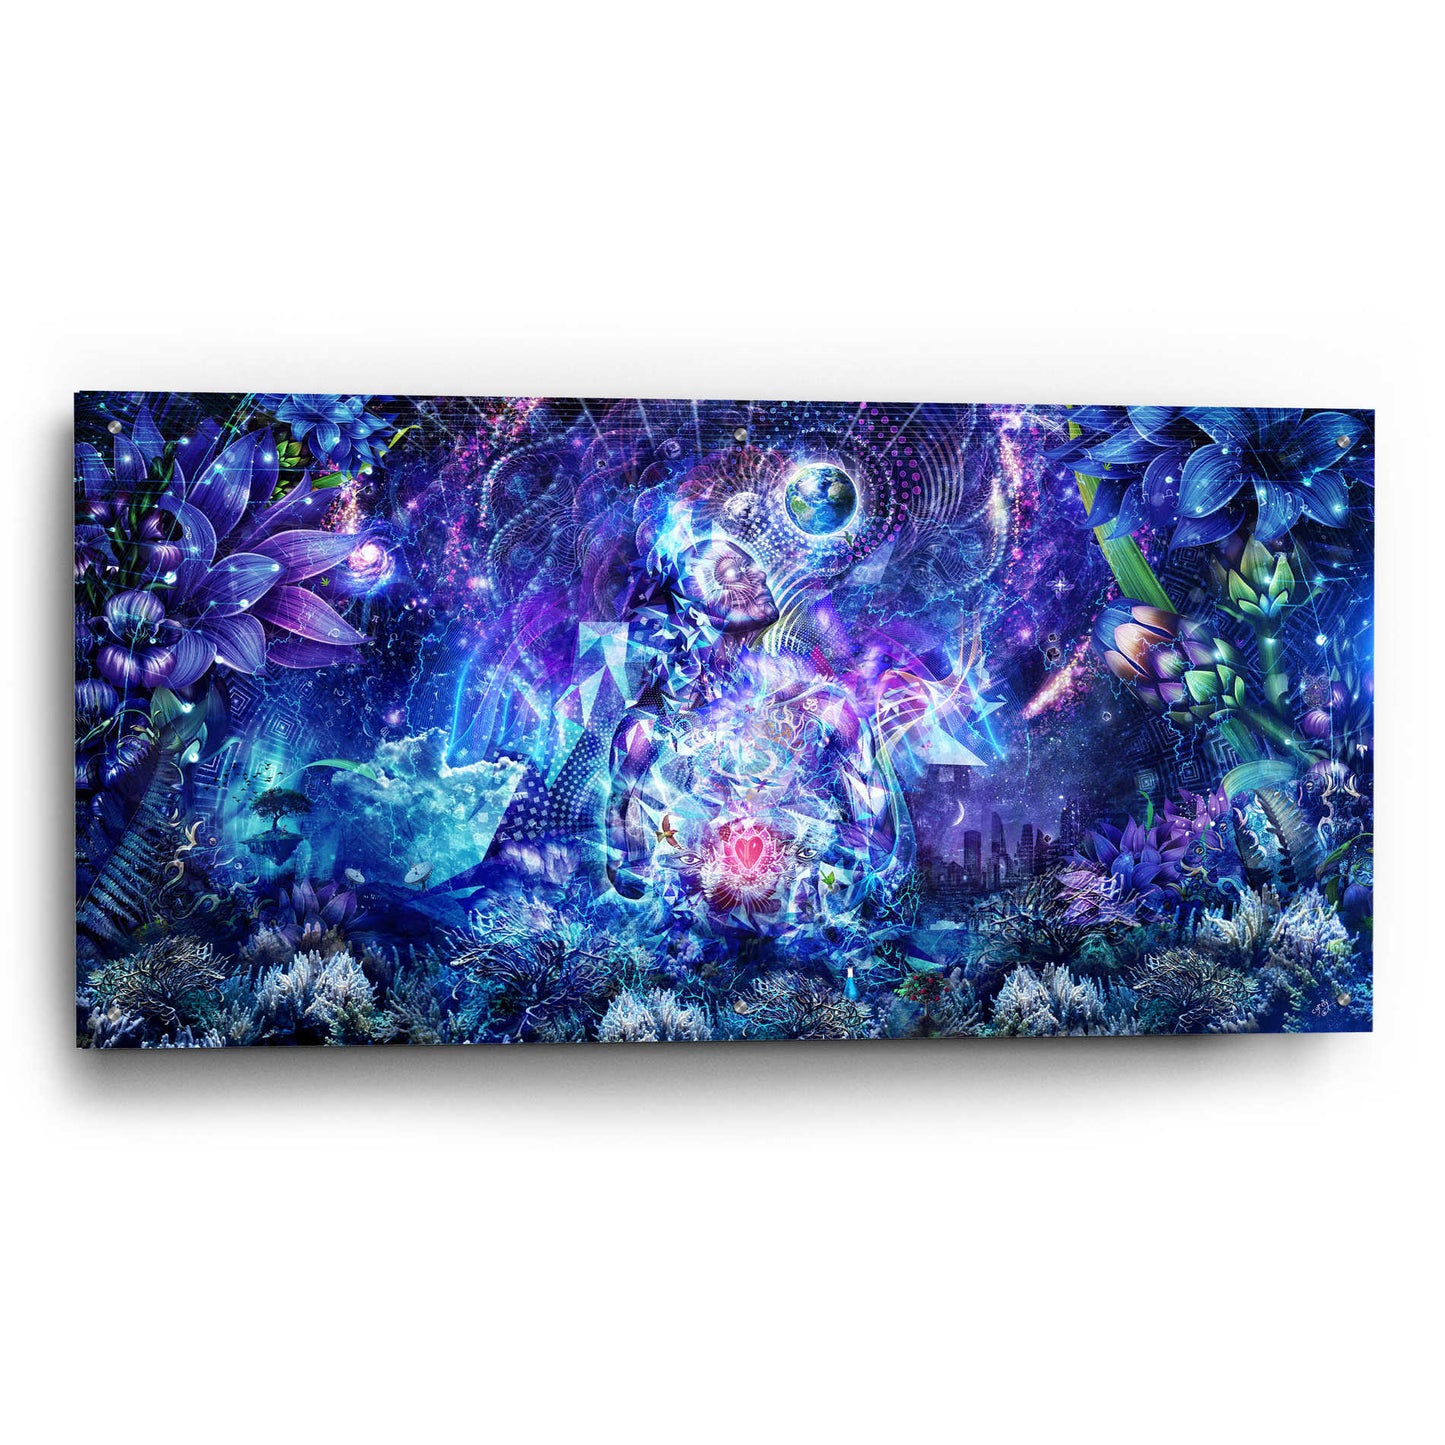 Epic Art 'Transcension' by Cameron Gray, Acrylic Glass Wall Art,48x24